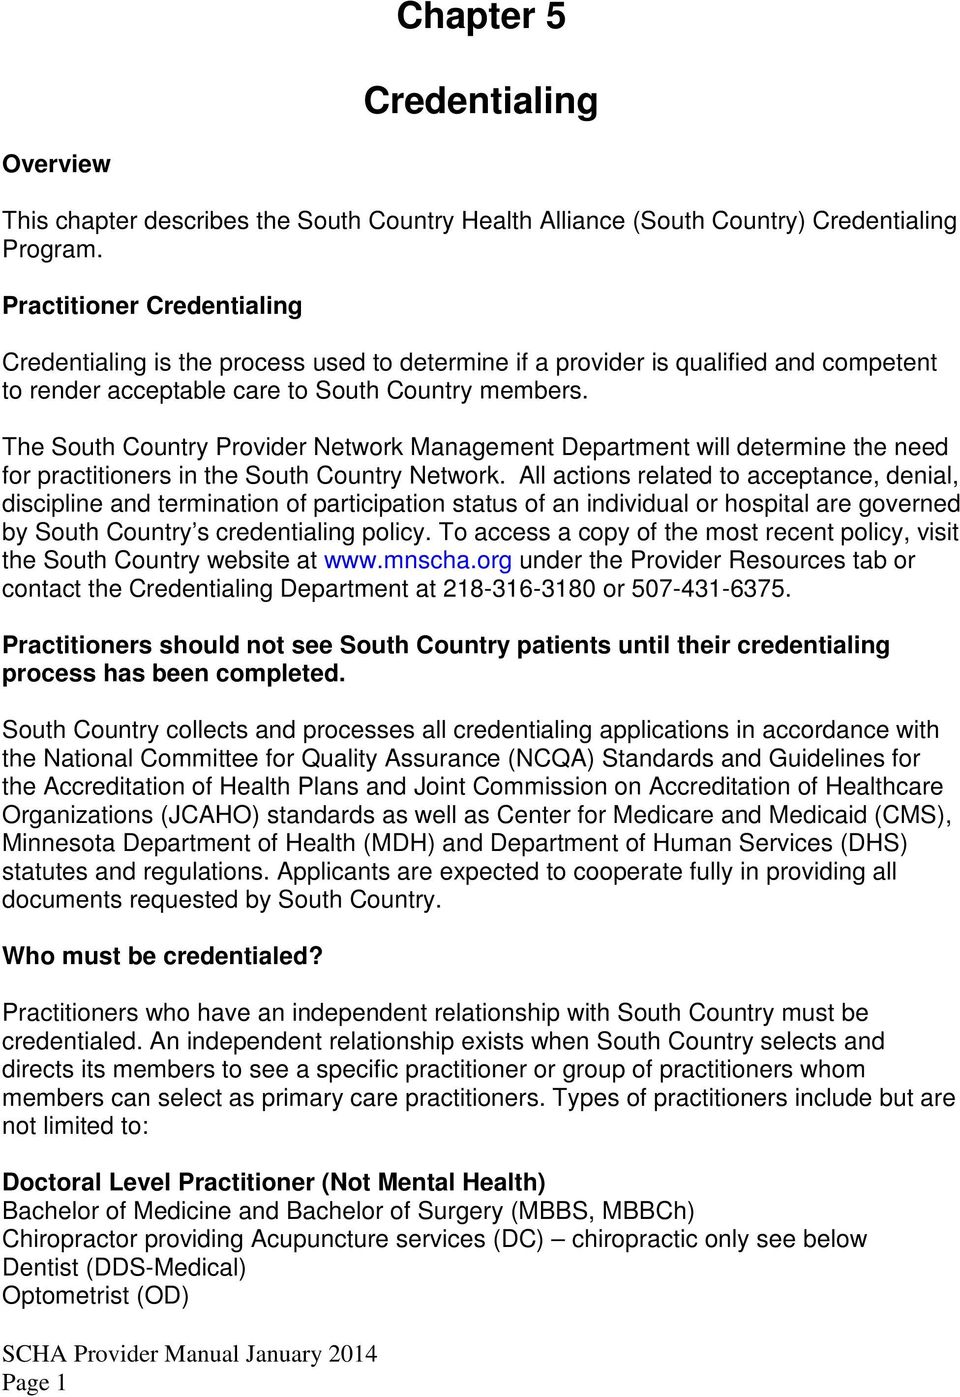 The South Country Provider Network Management Department will determine the need for practitioners in the South Country Network.